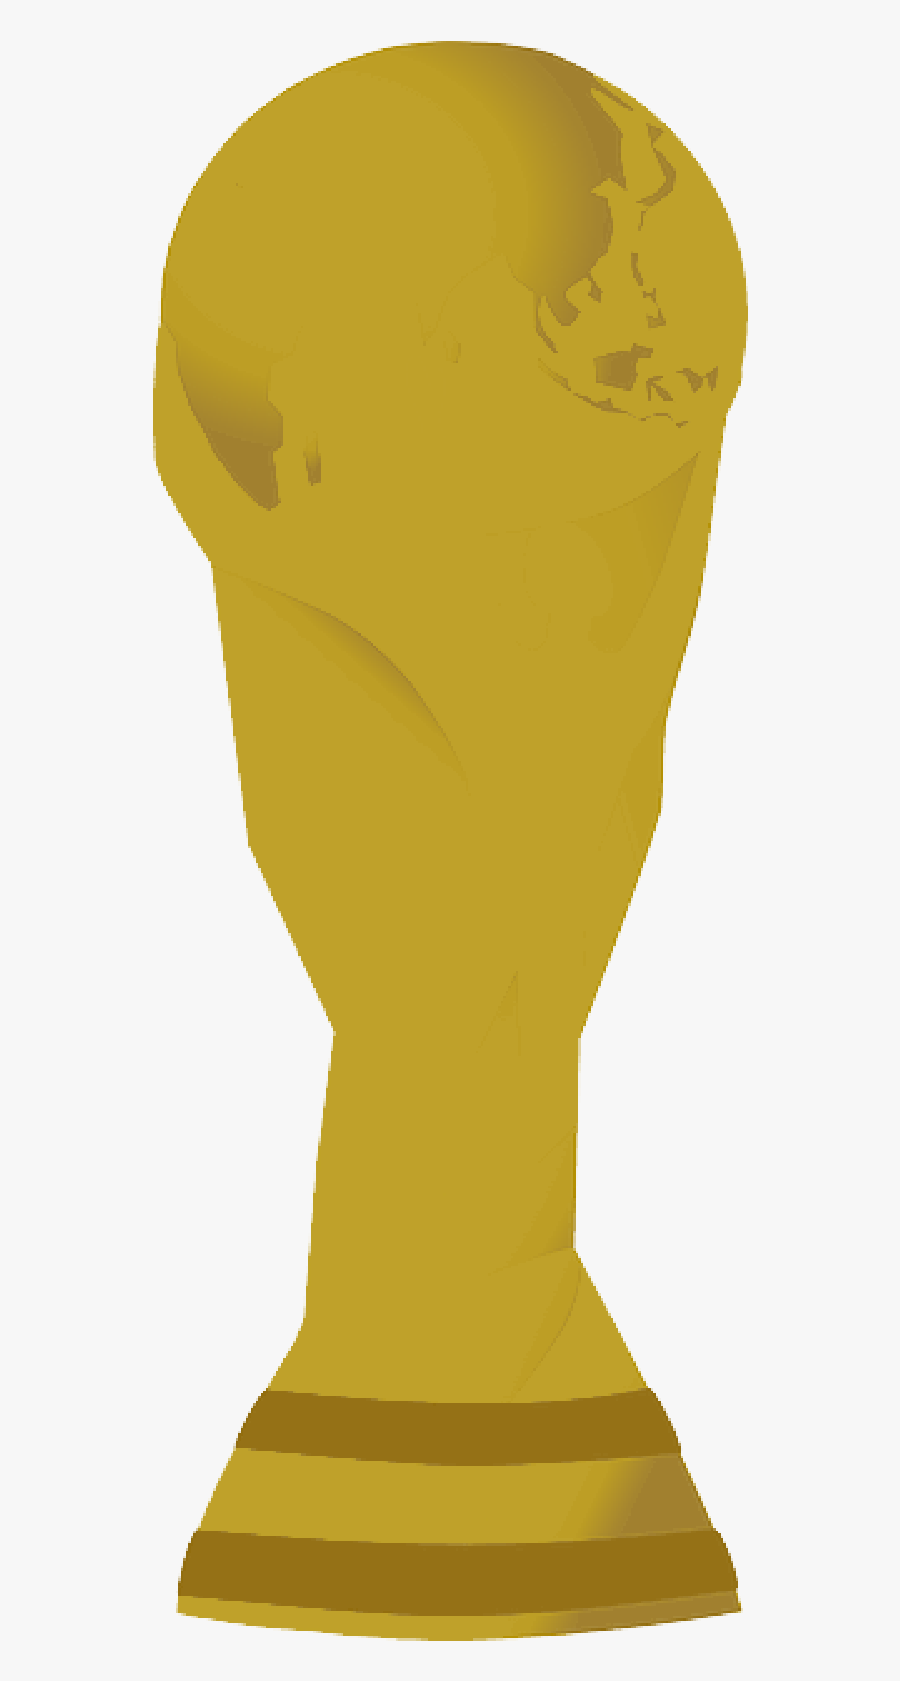 World, Cup, Soccer, Gold, Sports, Football, Trophy - Fifa World Cup Trophy Png, Transparent Clipart